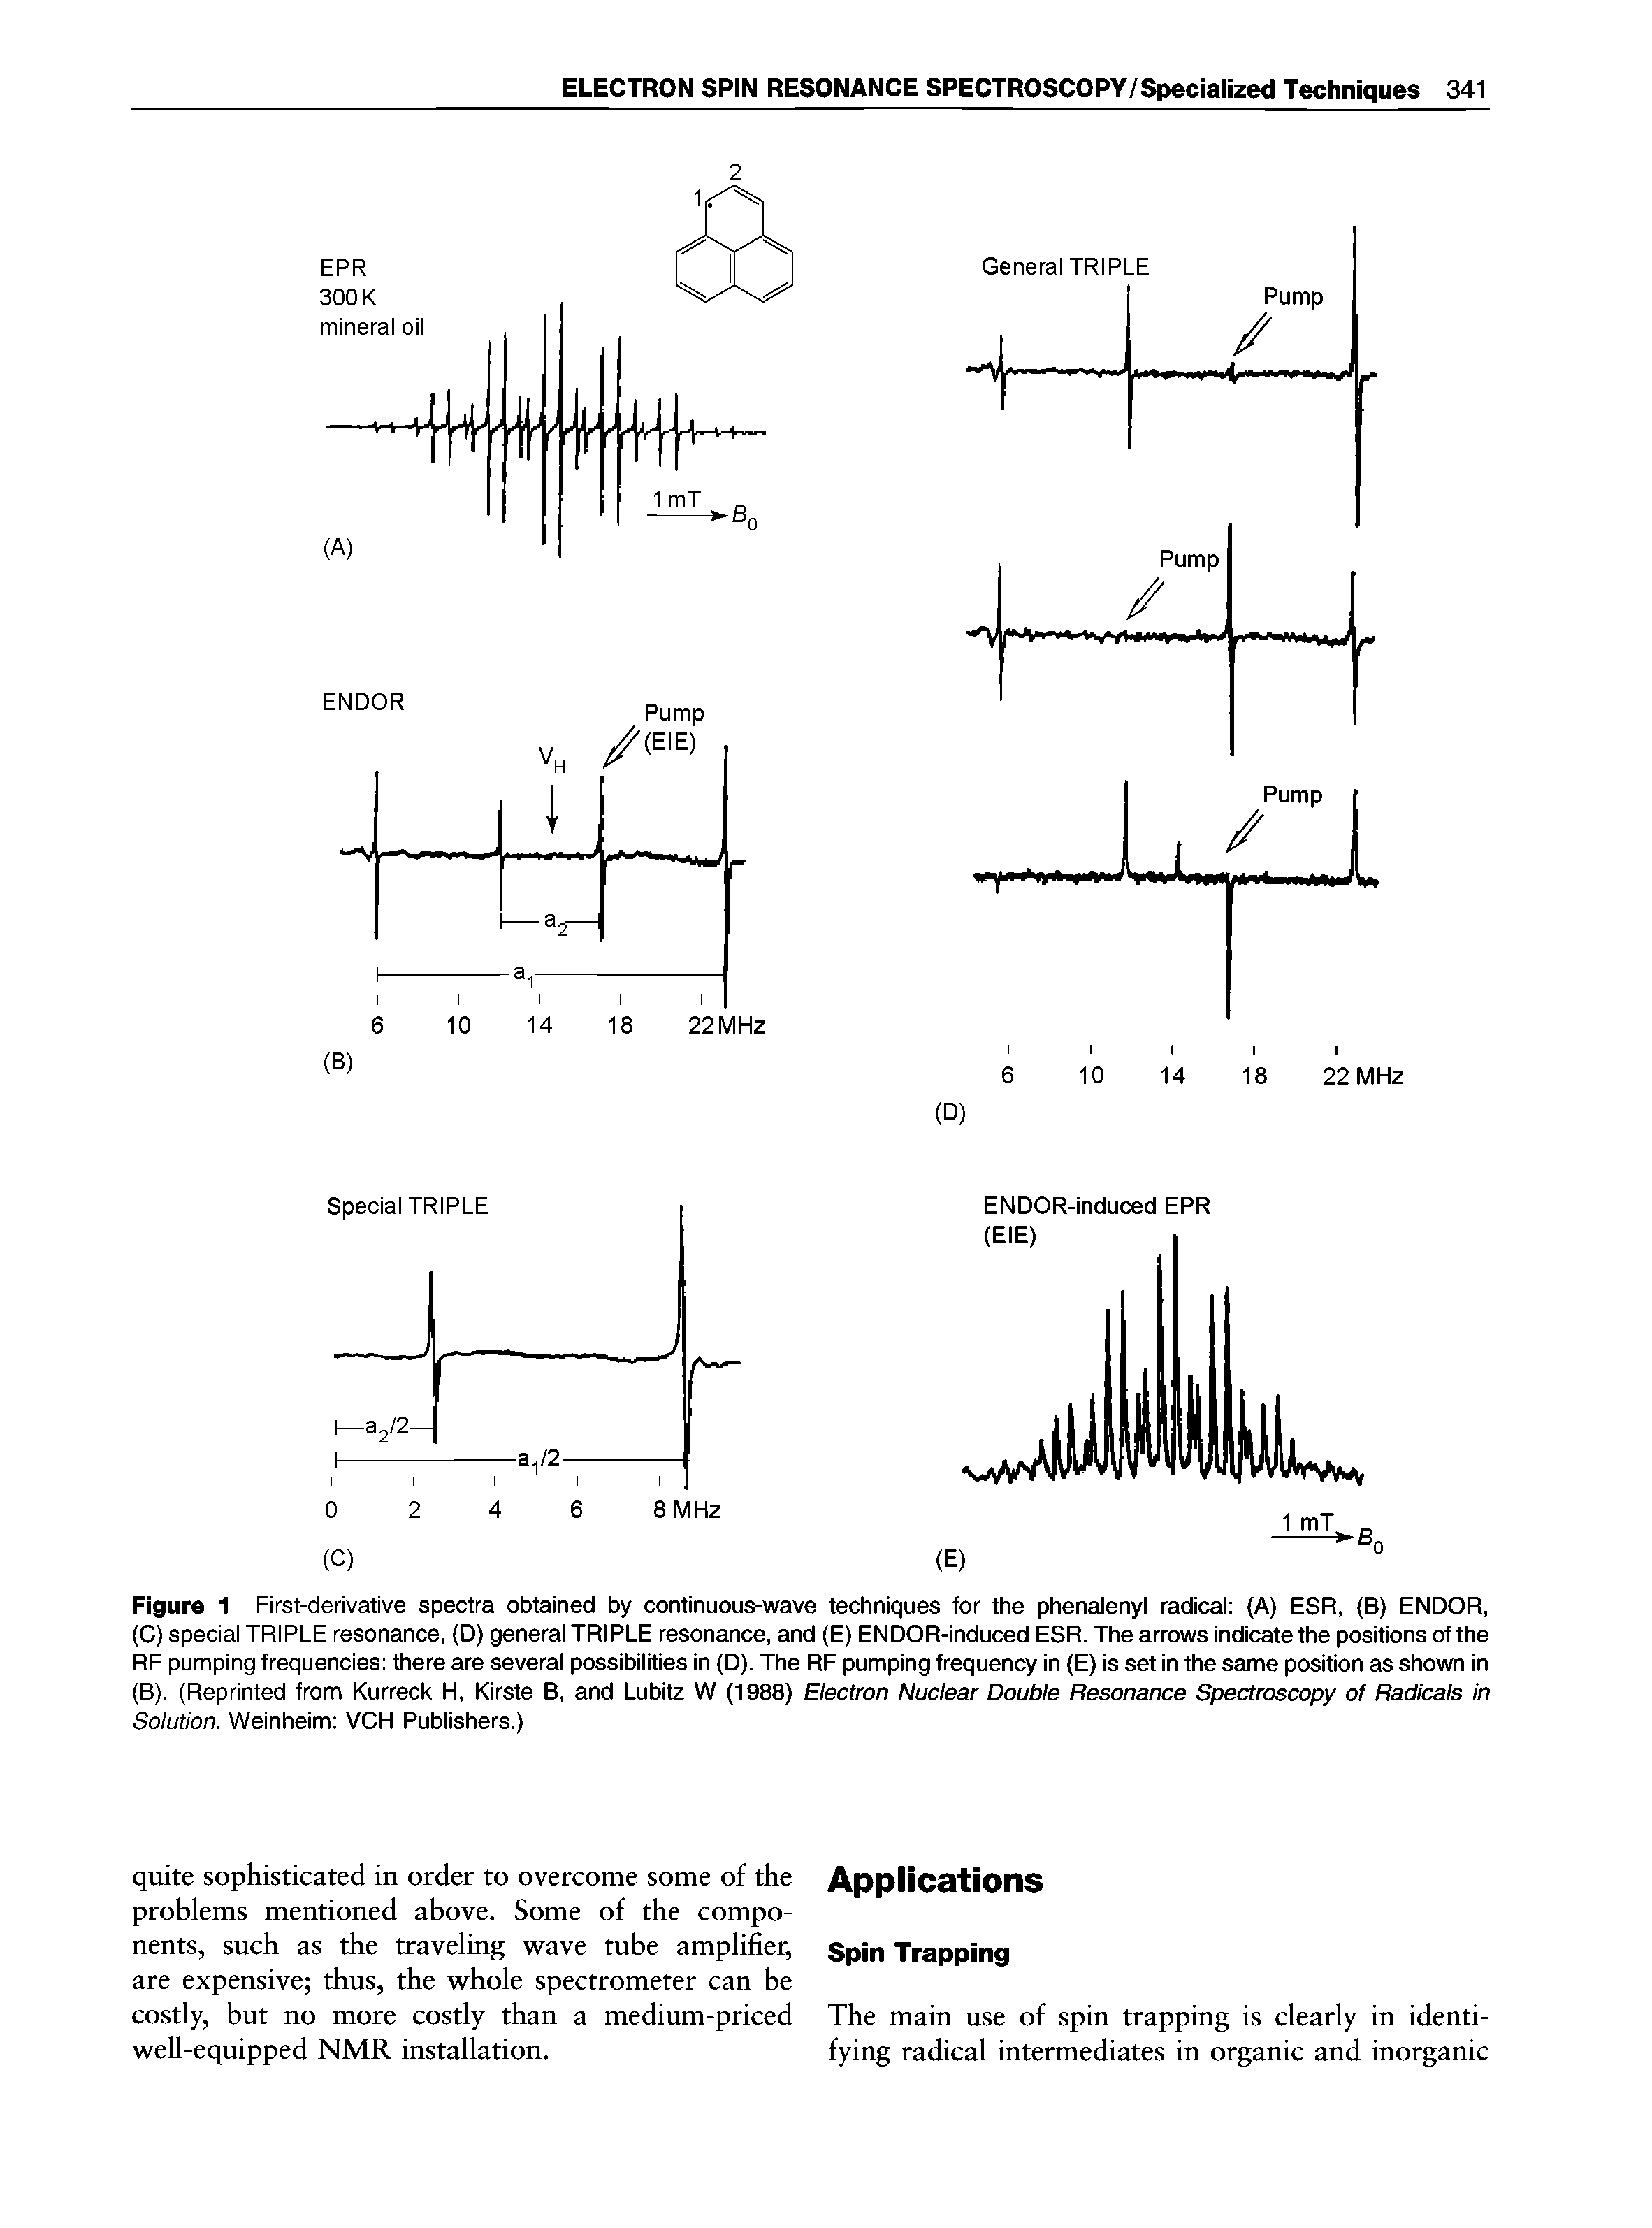 Figure 1 First-derivative spectra obtained by continuous-wave techniques for the phenalenyl radical (A) ESR, (B) ENDOR, (C) special TRIPLE resonance, (D) general TRIPLE resonance, and (E) ENDOR-induced ESR. The arrows indicate the positions of the RF pumping frequencies there are several possibilities in (D). The RF pumping frequency in (E) is set in the same position as shown in (B). (Reprinted from Kurreck H, Kirste B, and Lubitz W (1988) Electron Nuclear Double Resonance Spectroscopy of Radicals In Solution. Weinheim VCH Publishers.)...